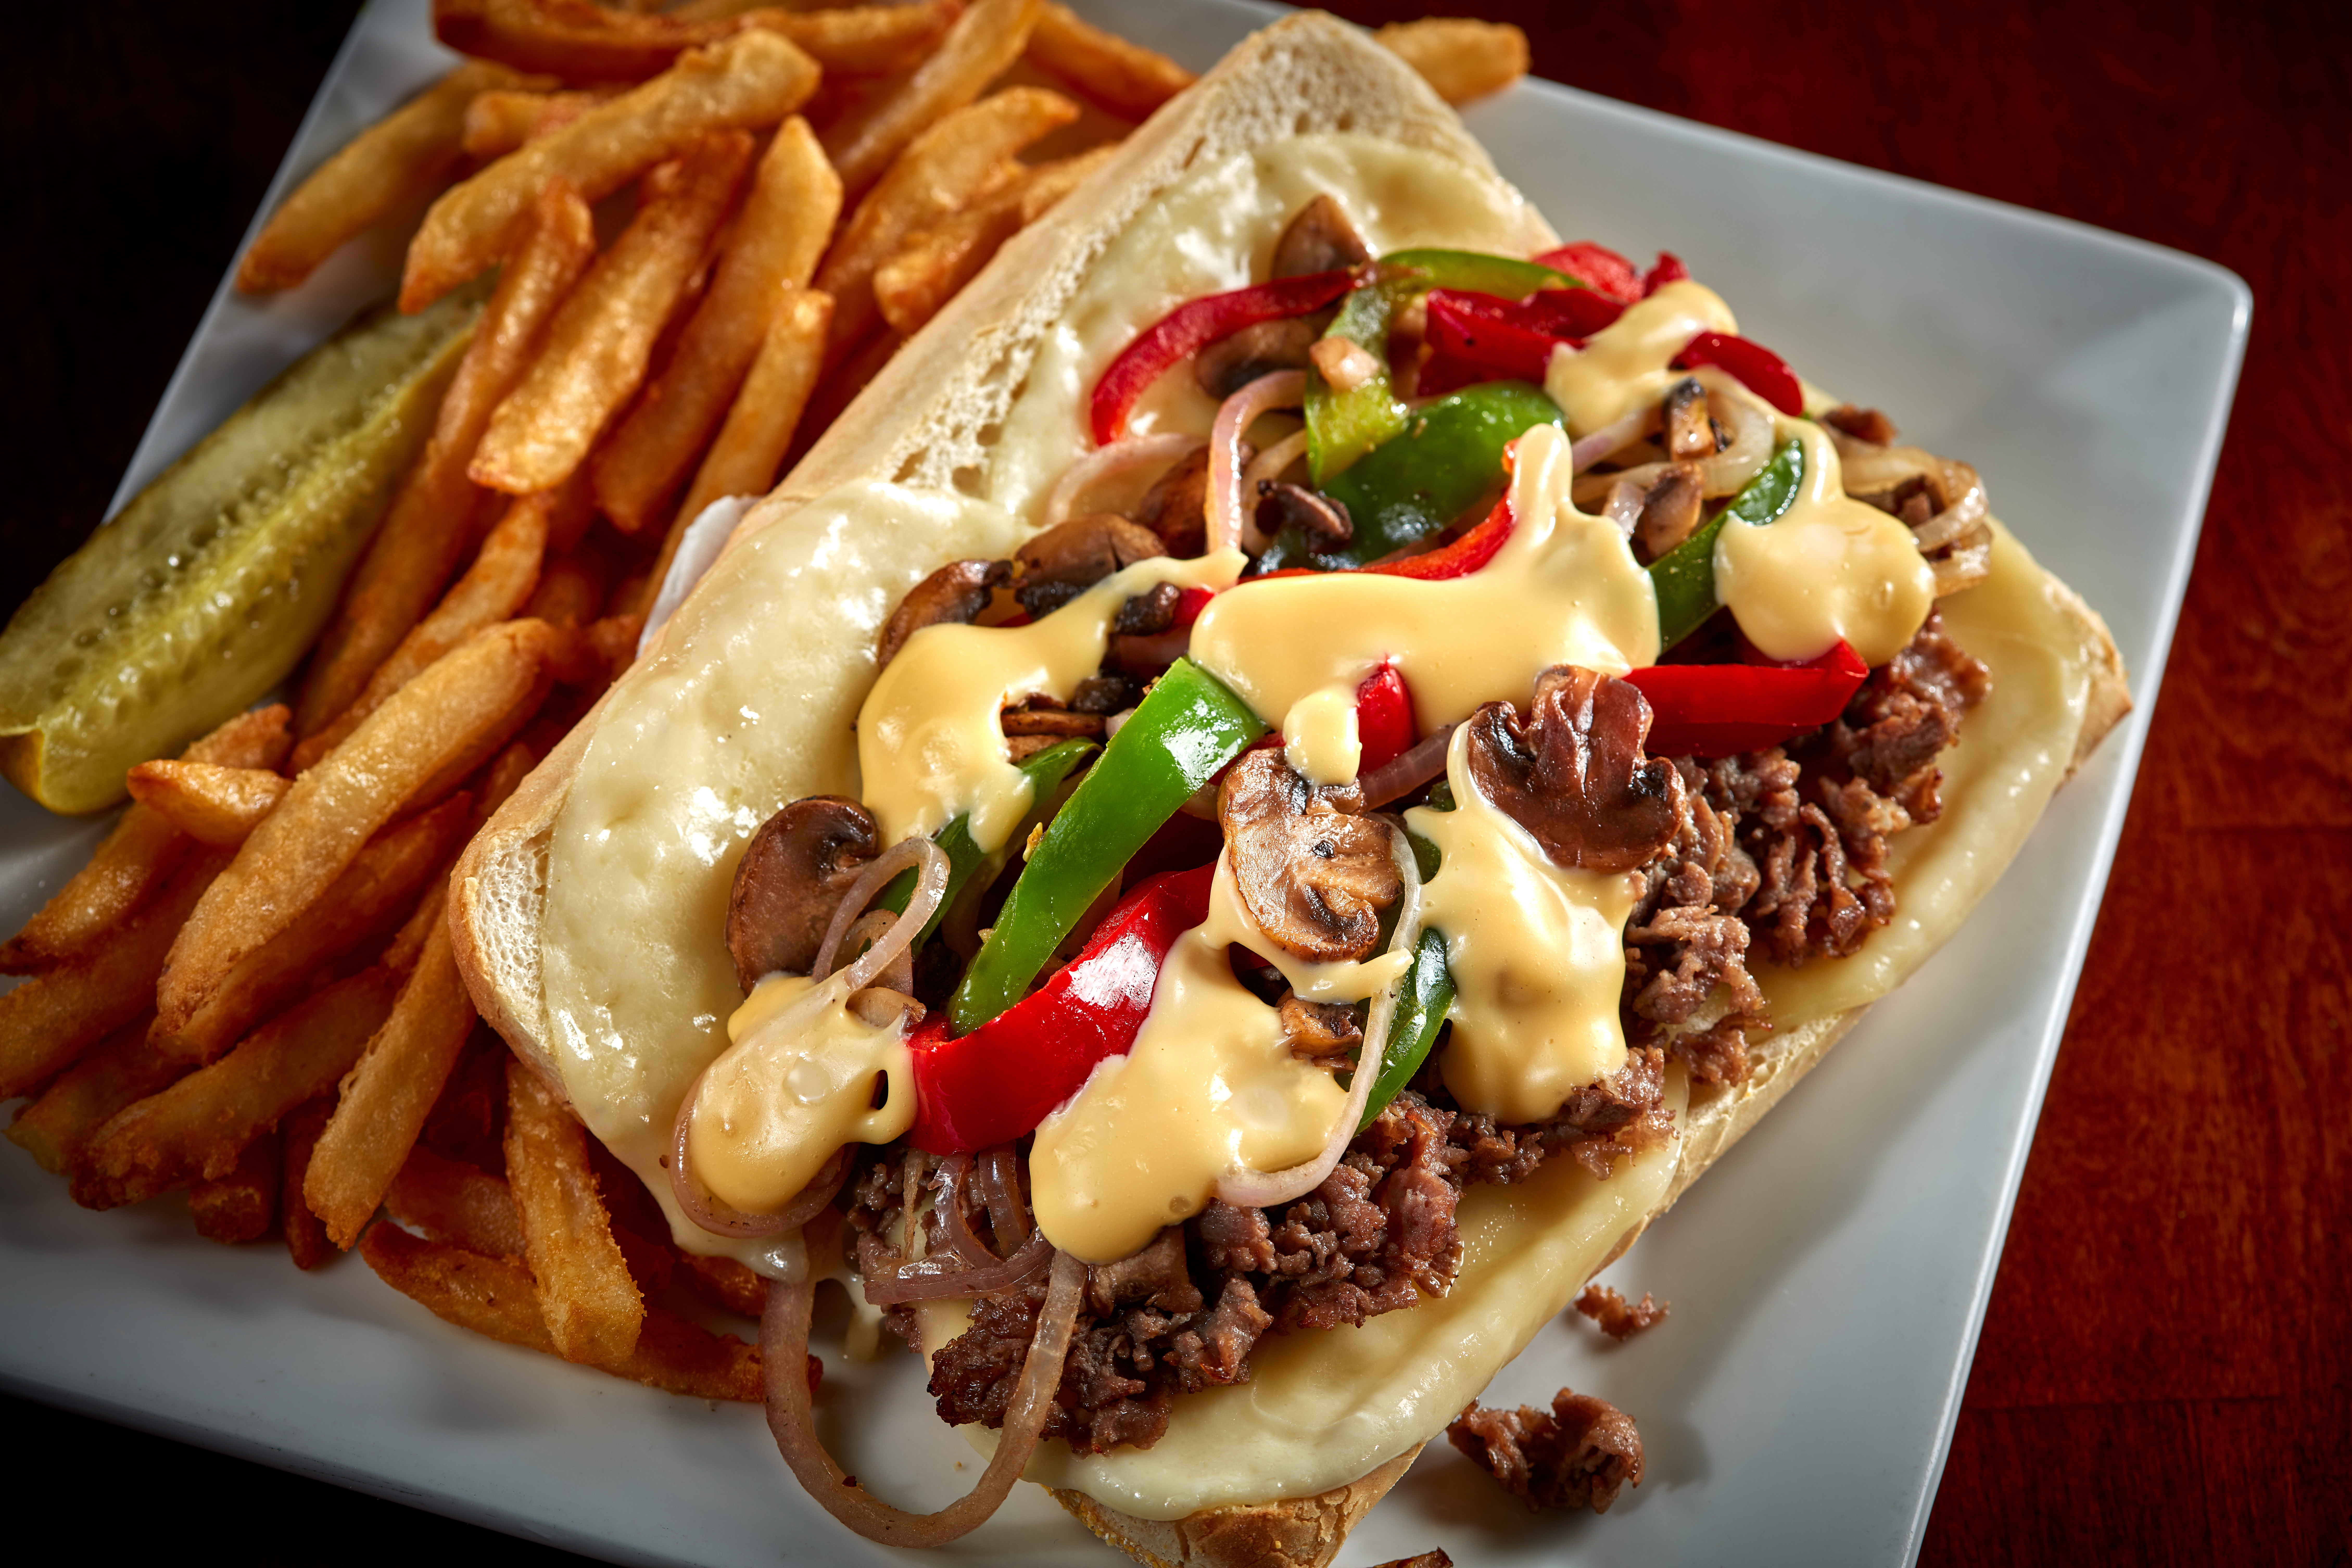 Shaved sirloin steak with sauteed red onion, mushrooms, green and red peppers topped with melted provolone cheese and our Spotted Cow beer cheese. All stuffed into a hoagie bun.  $16.99